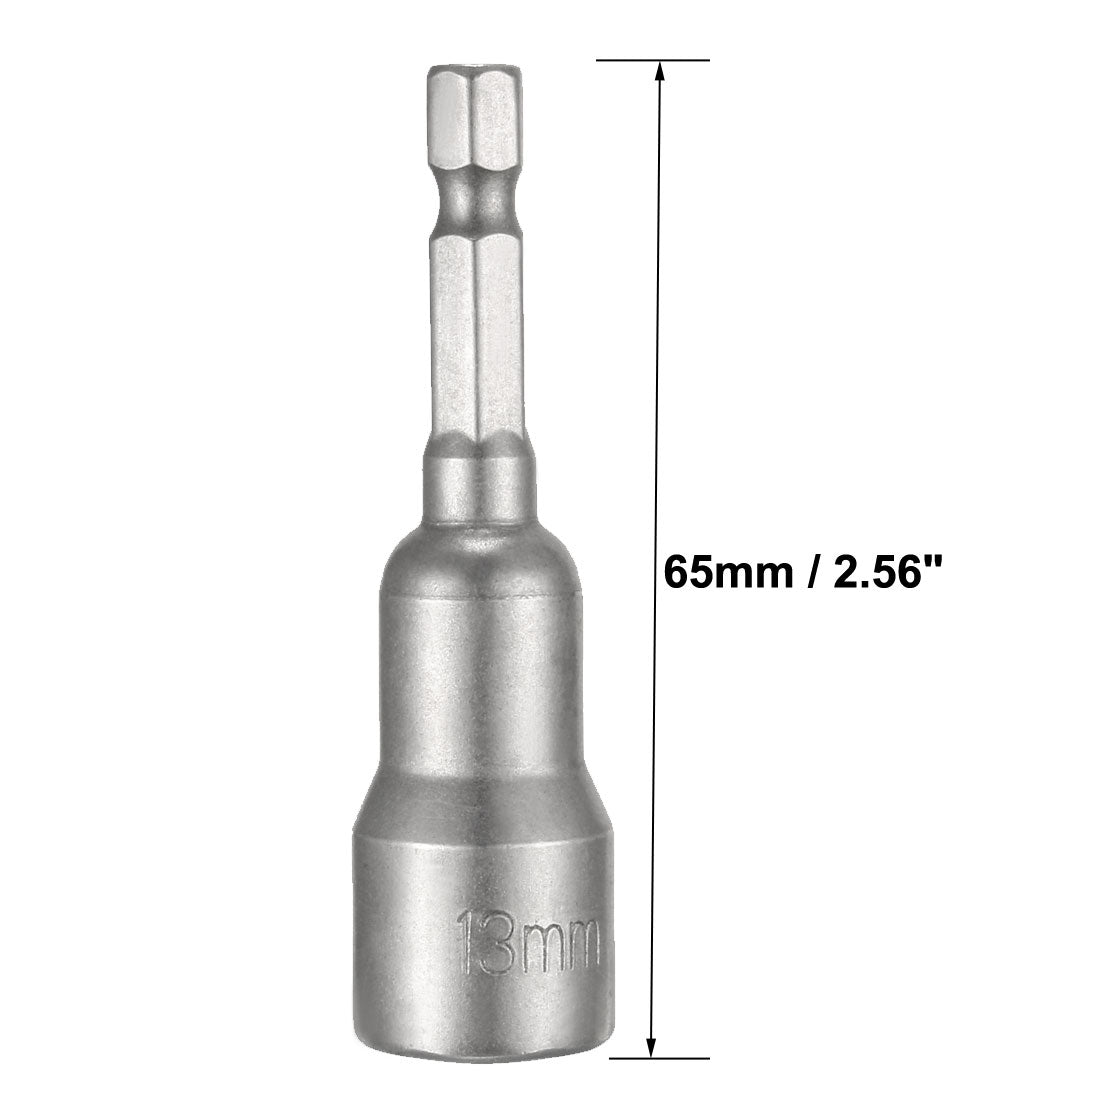 uxcell Uxcell Quick-Change Hex Shank Magnetic Nut Setter Driver Drill Bit, Metric